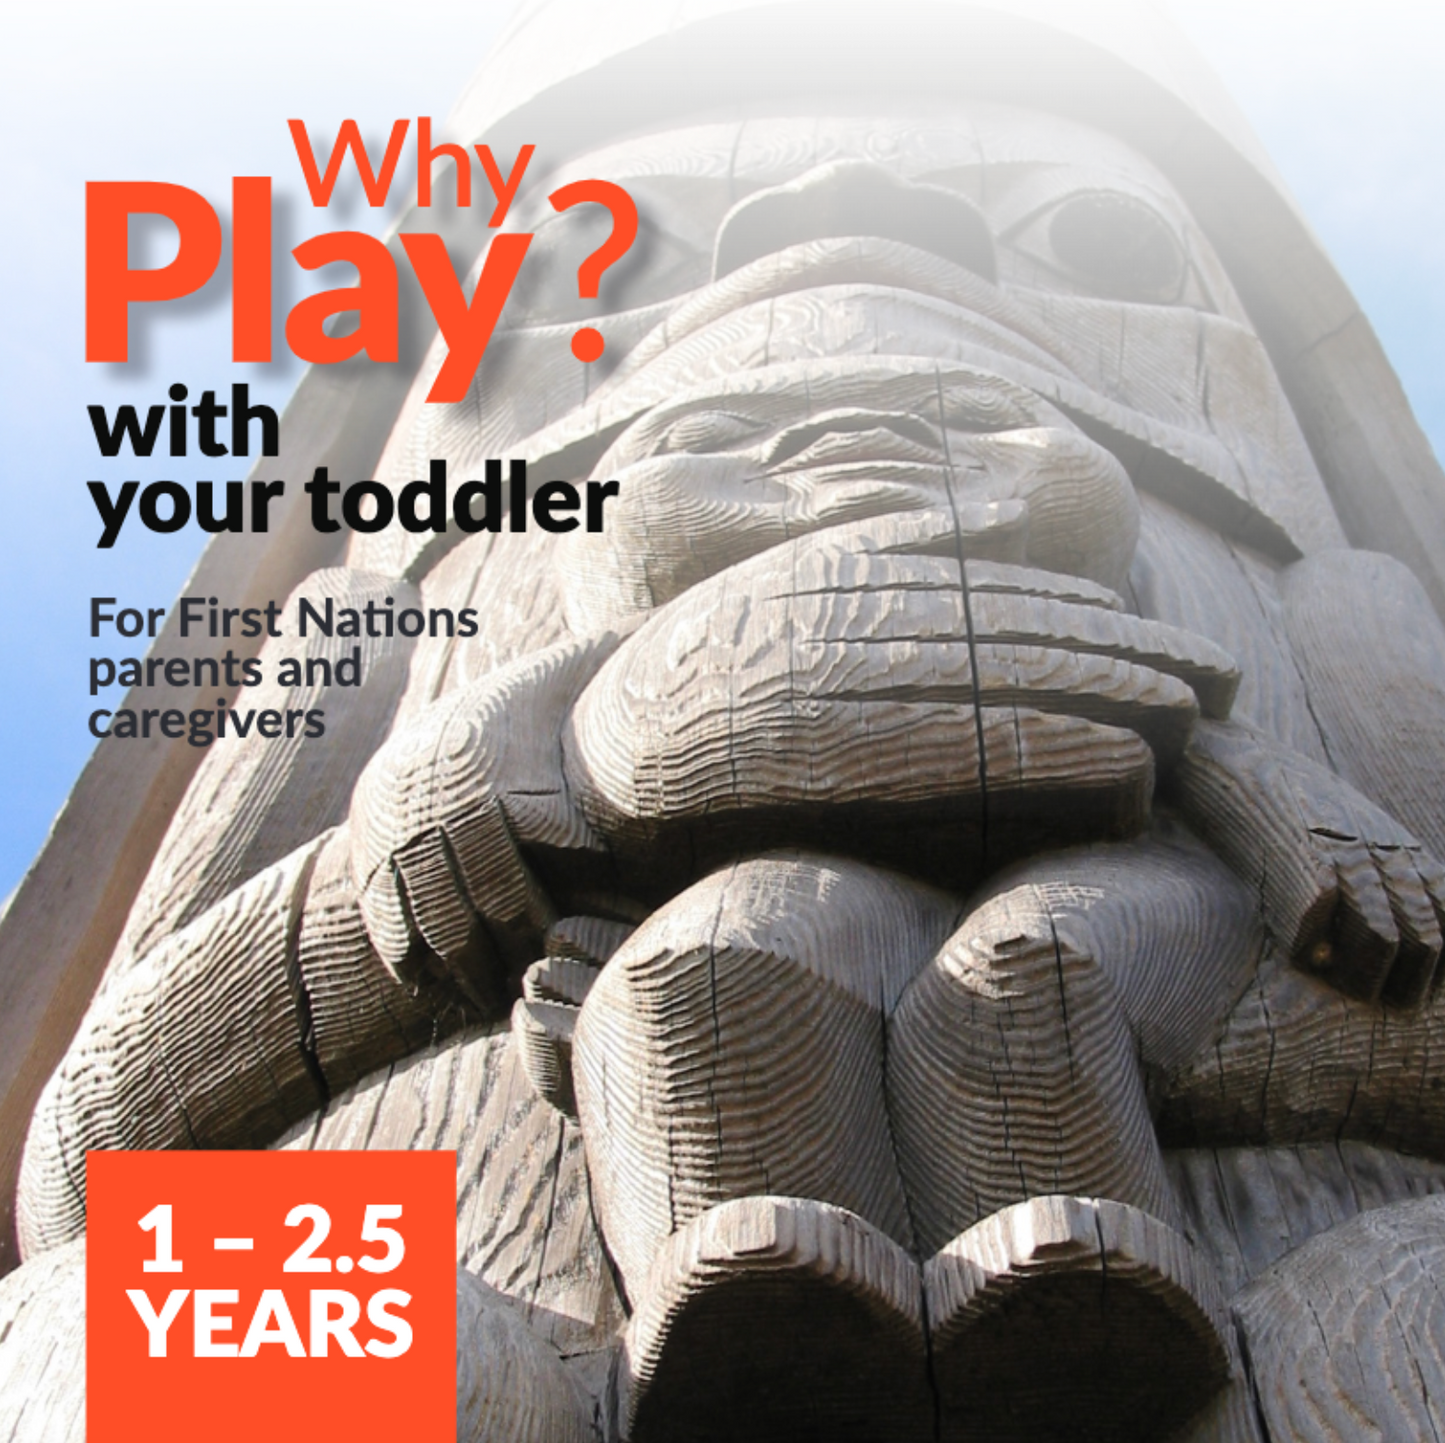 Why Play? with Your Toddler for First Nations Parents and Caregivers